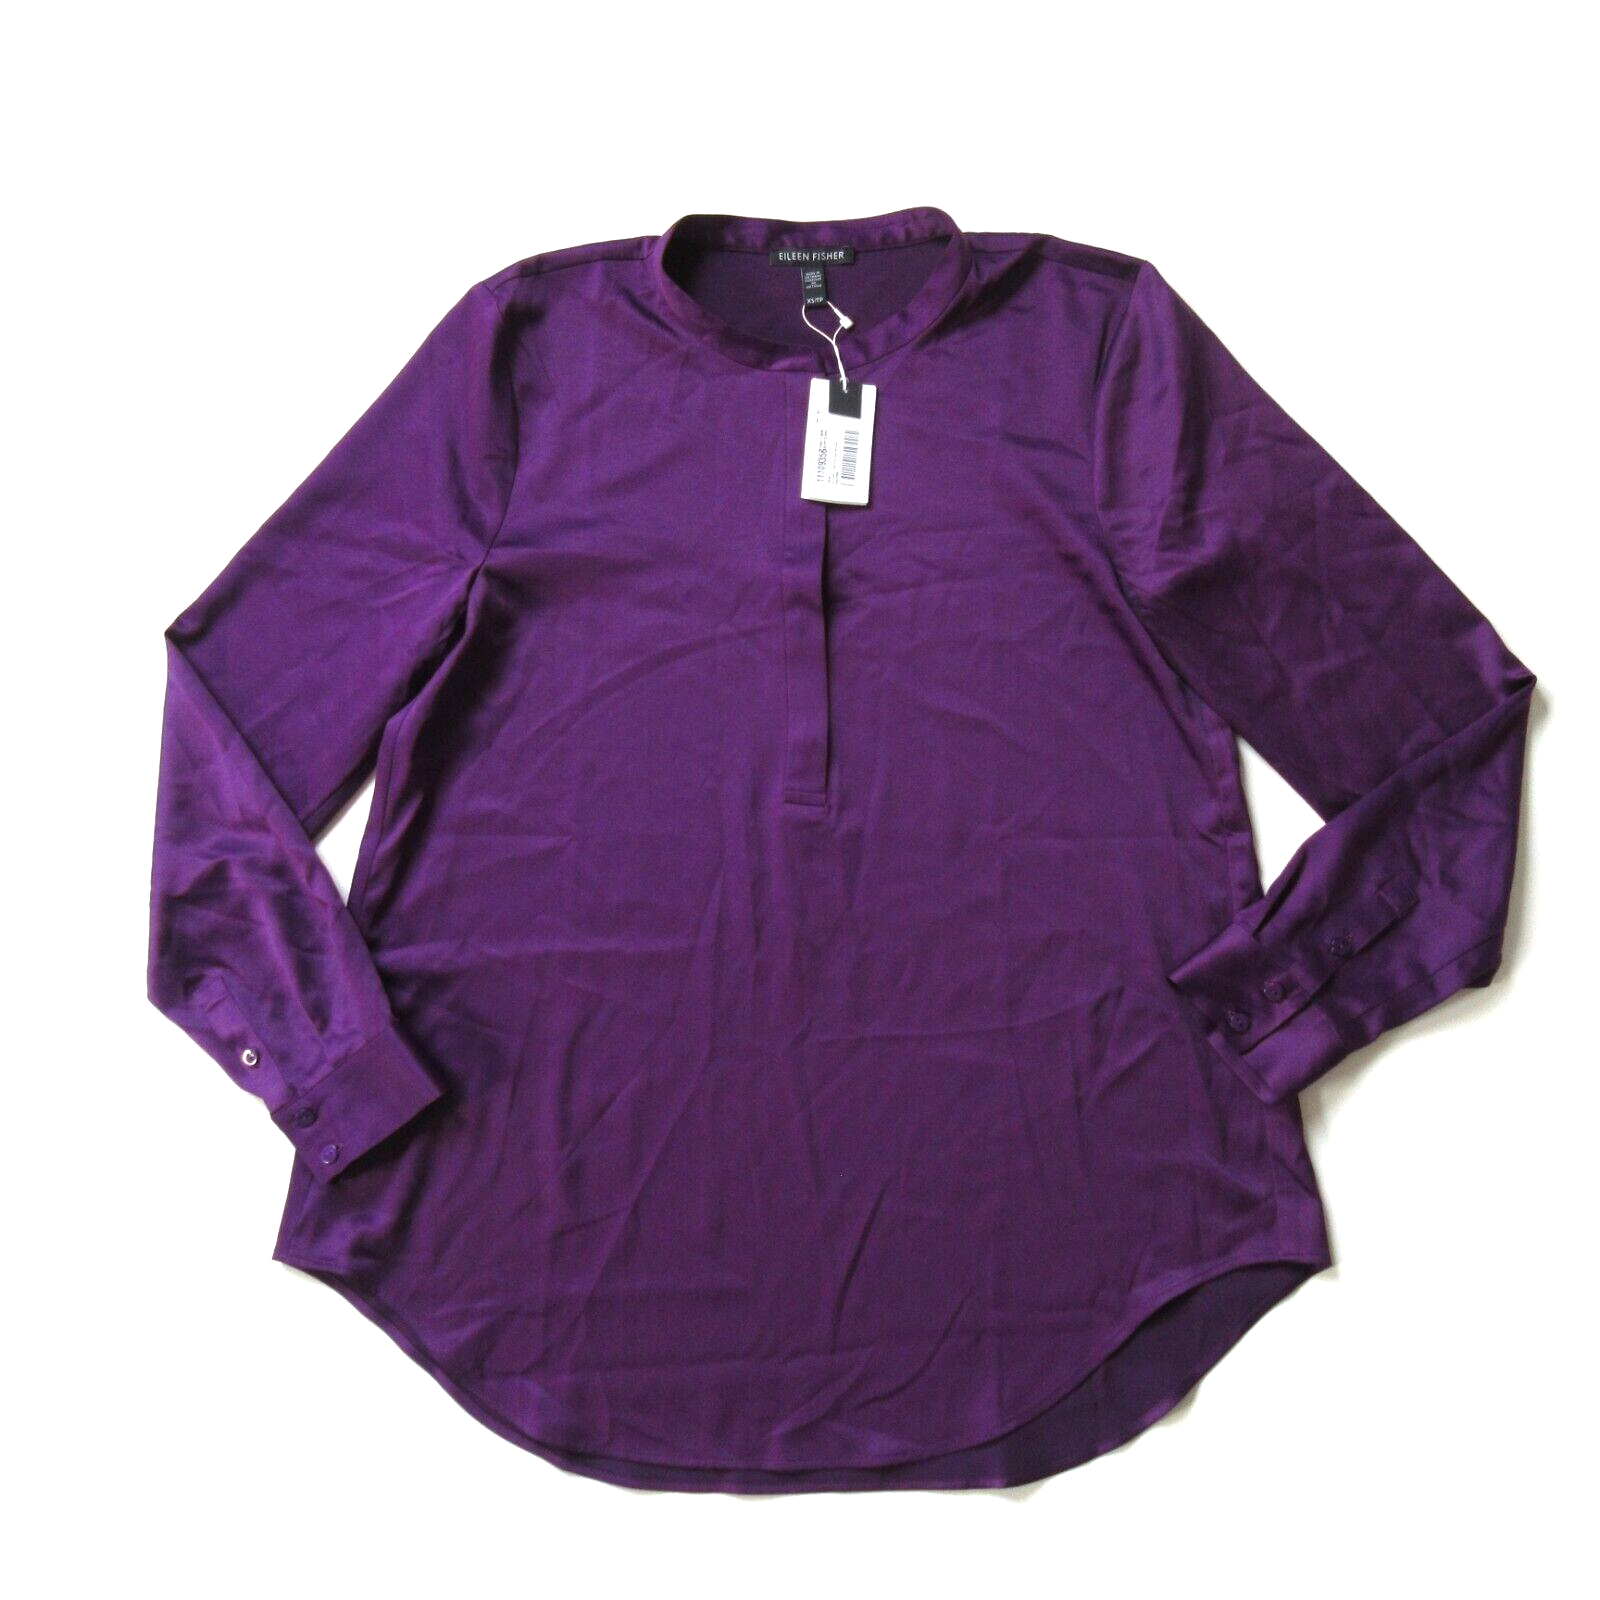 Primary image for NWT Eileen Fisher Satin Henley Blouse in Raisinette Purple L/S Button Top XS